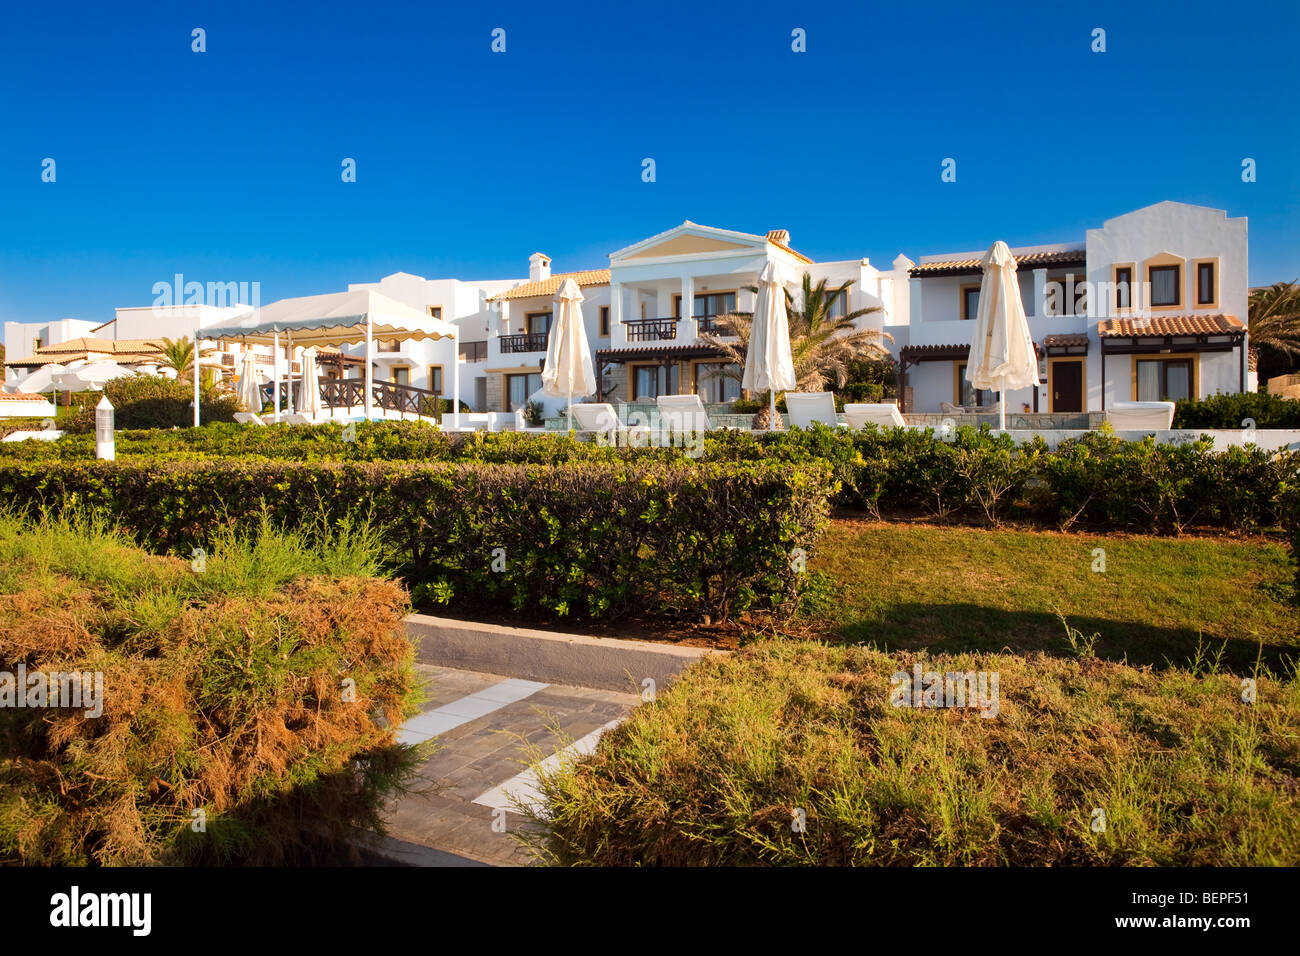 Territory of hotel with a path, palm trees and country houses Stock Photo